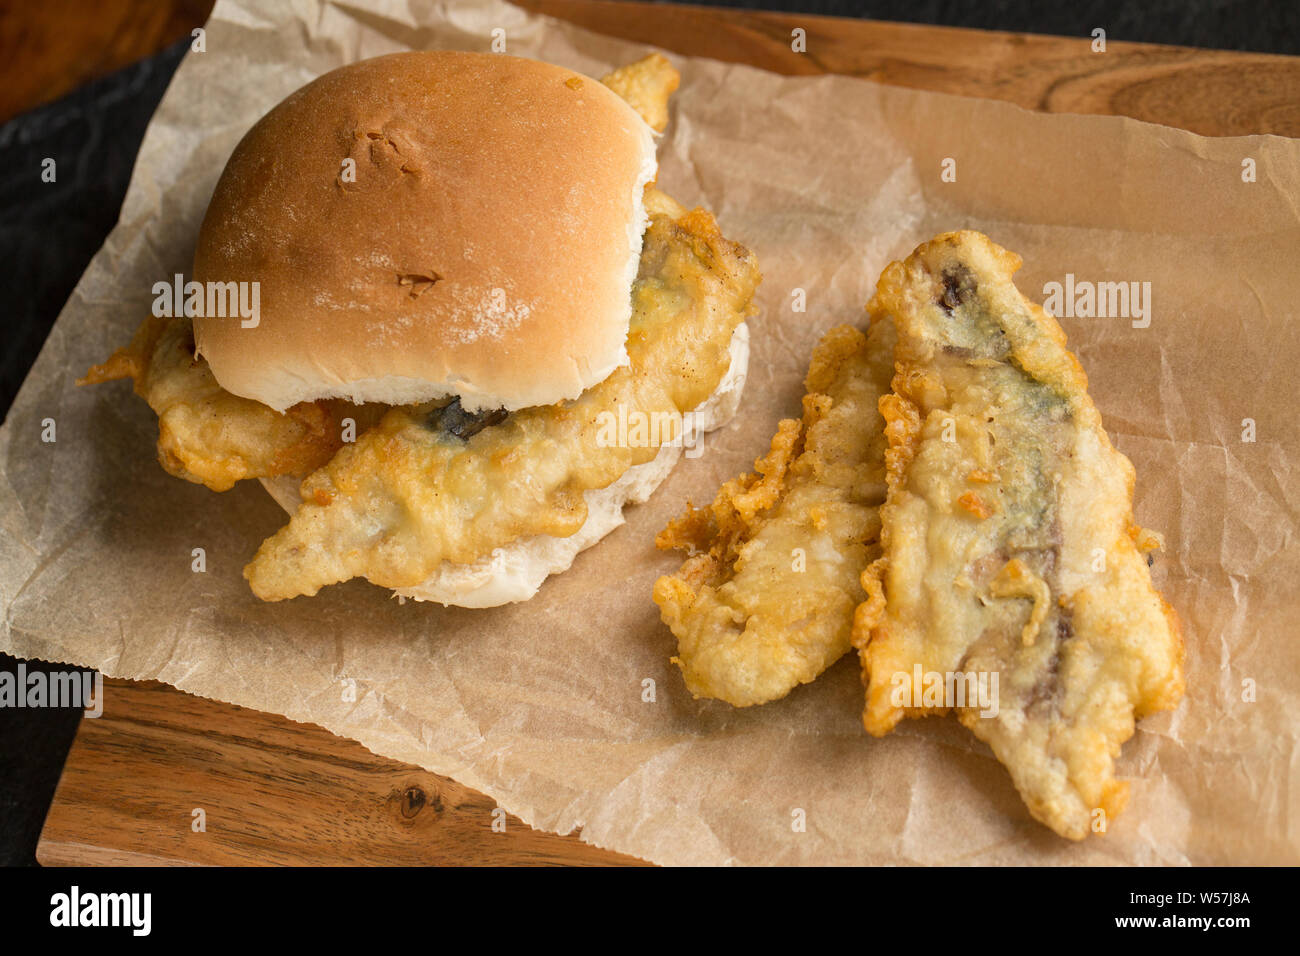 Fillets of mackerel, Scomber scombrus, that have been dipped in flour and batter and deep fried to make a homemade mackerel burger. The mackerel were Stock Photo